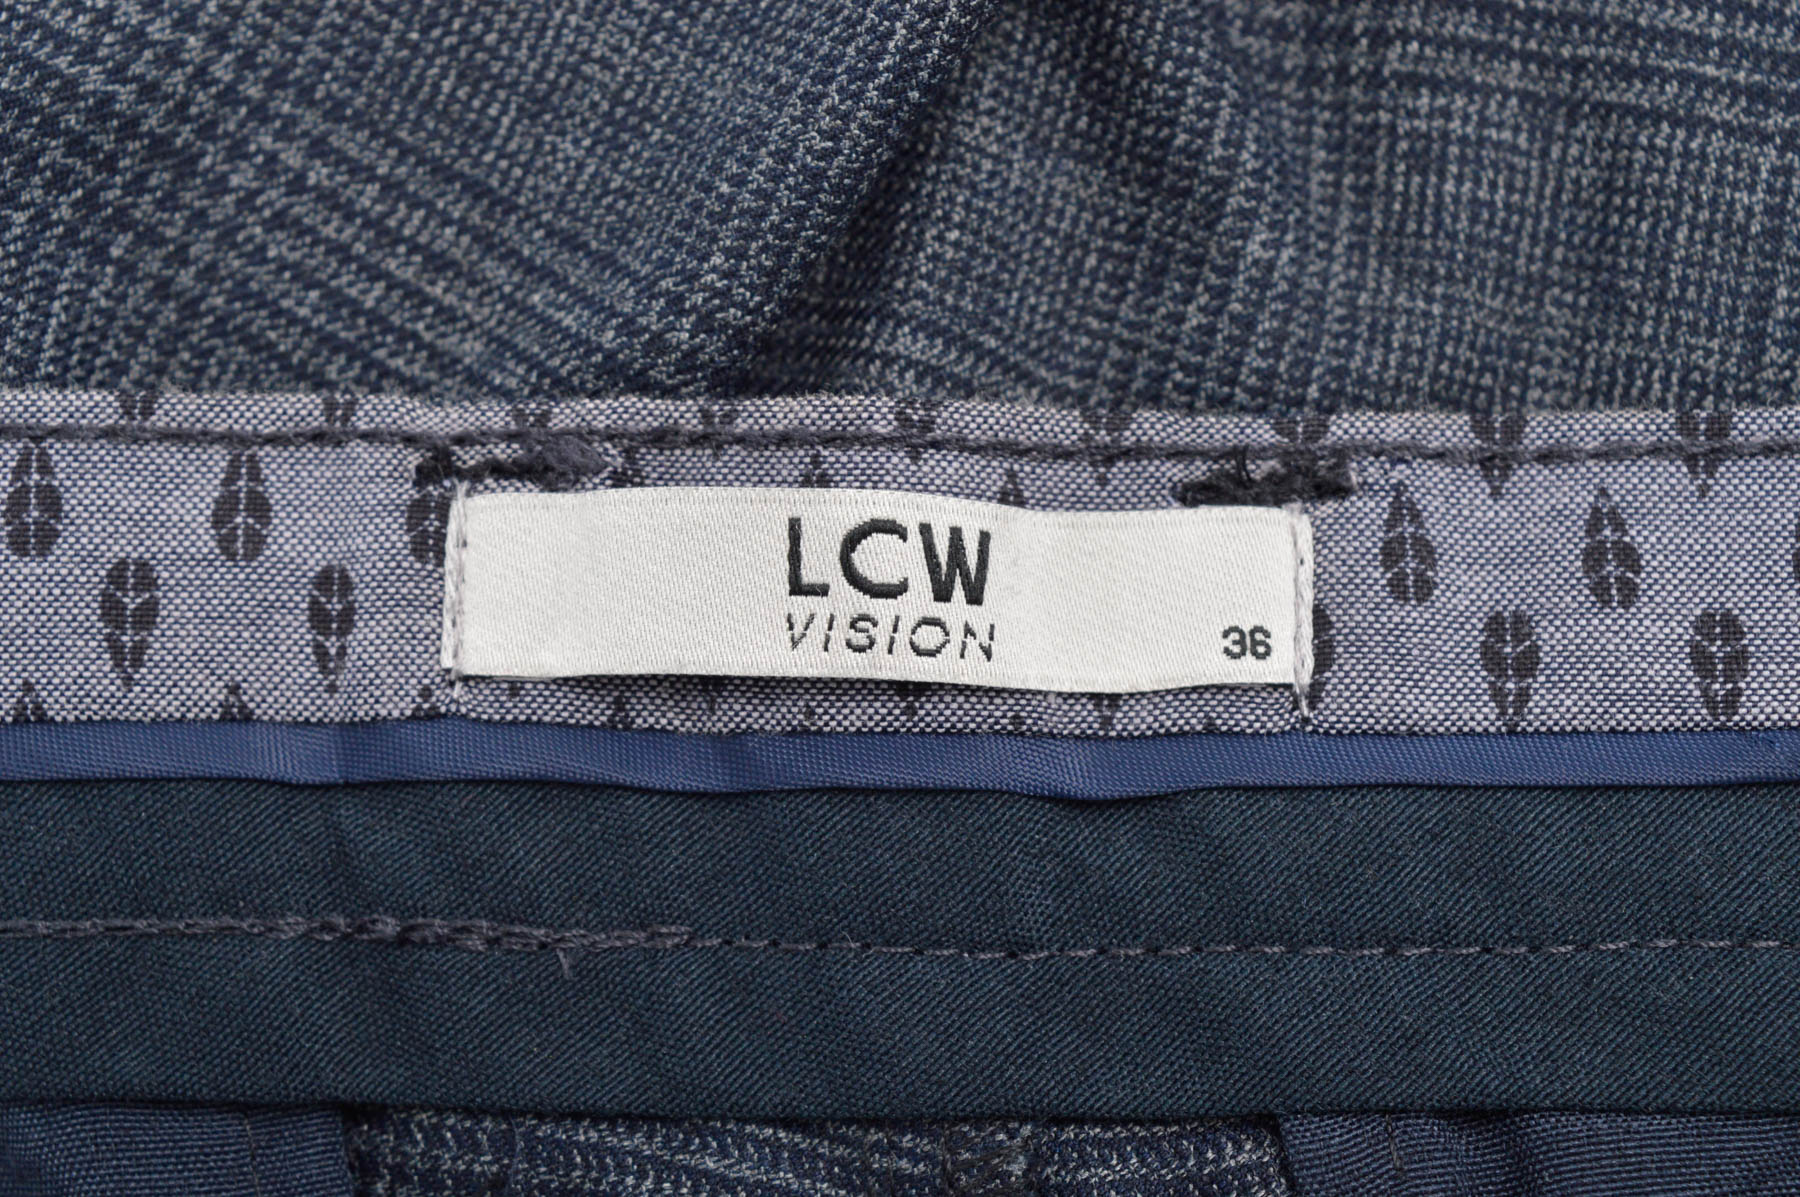 Men's trousers - LCW VISION - 2